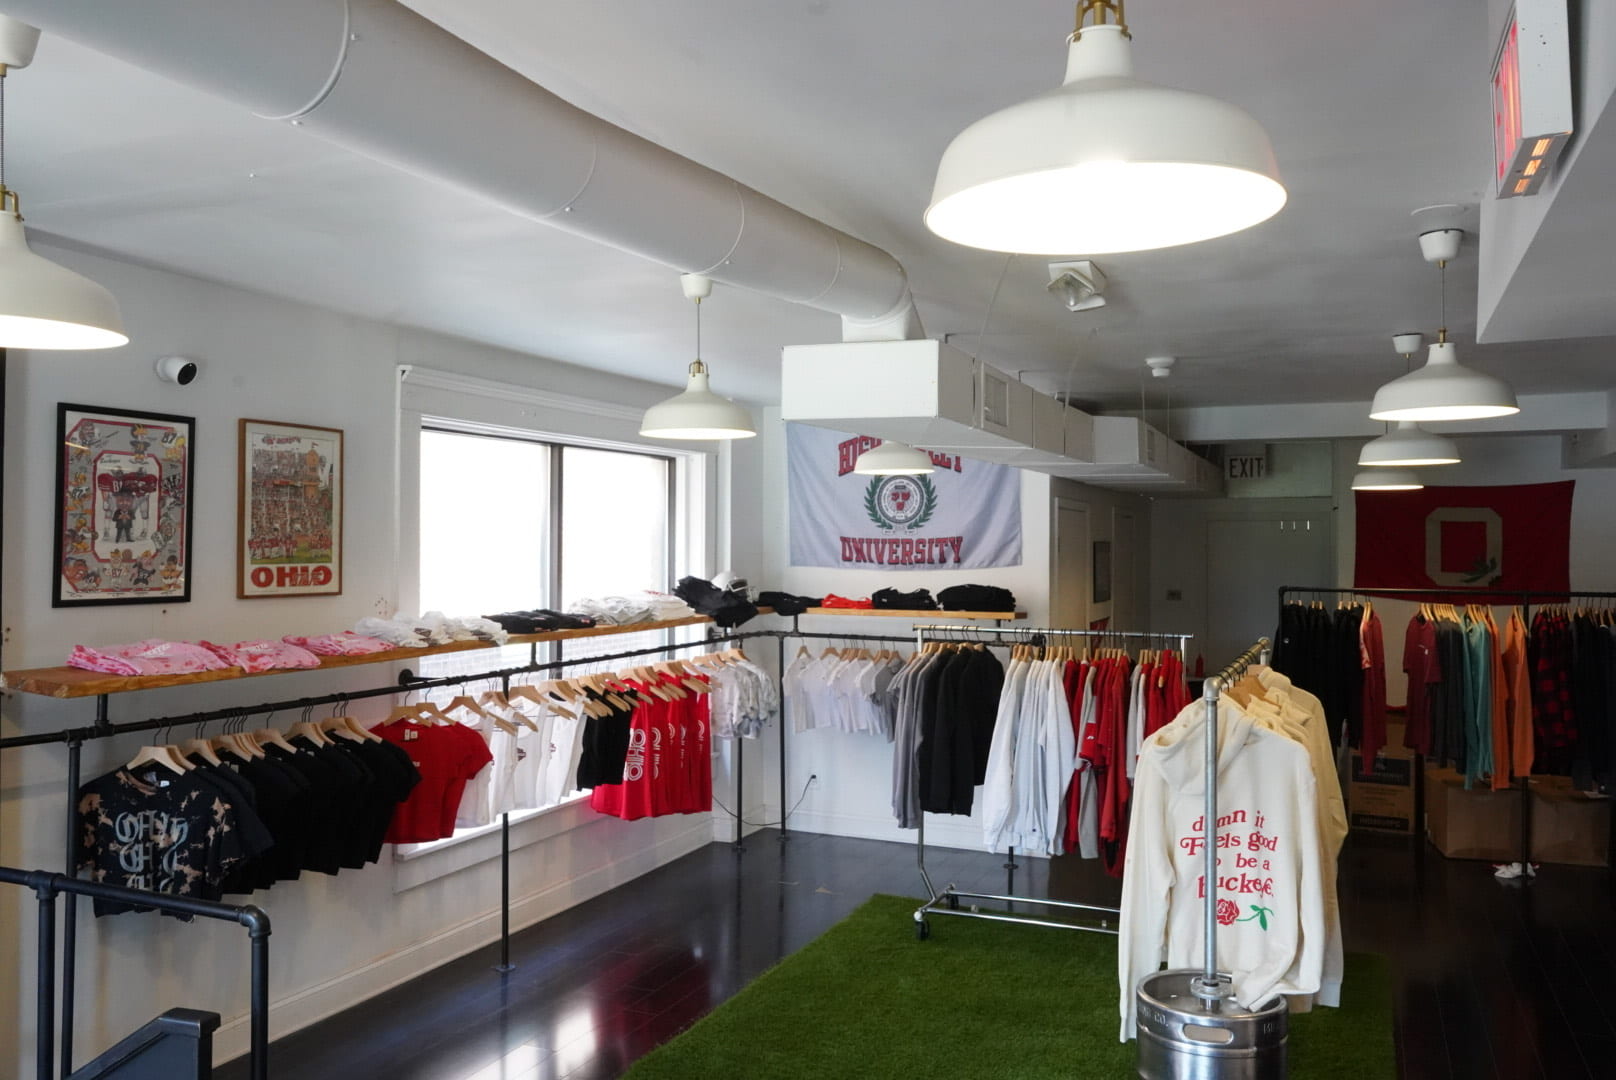 Upstairs expansion at Mid High Market caters to students with a taste for Ohio State fashion